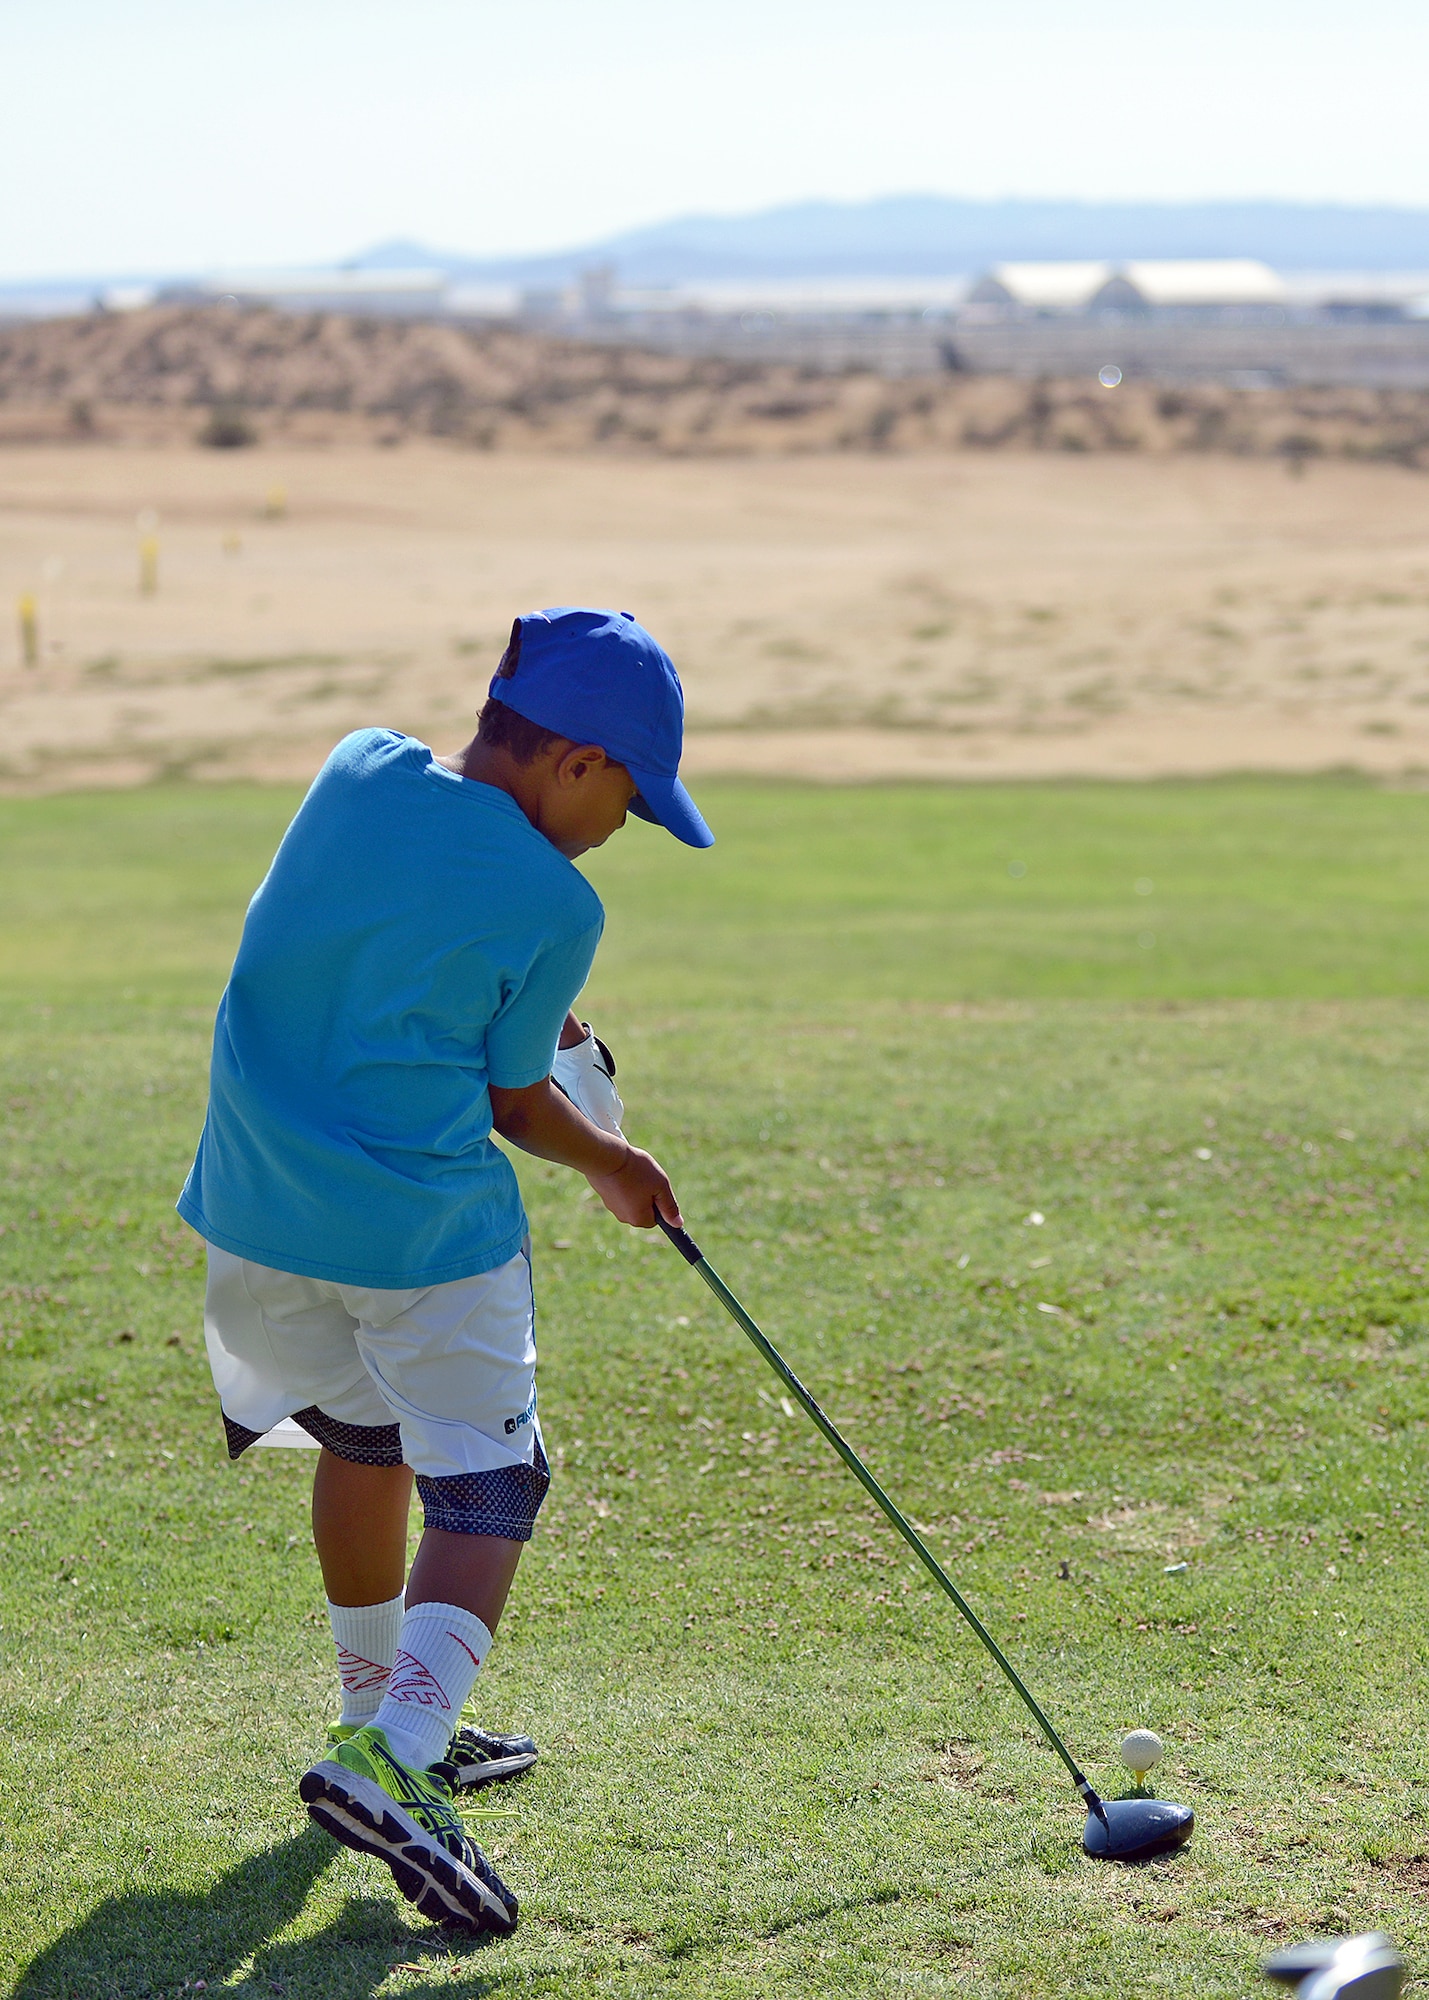 Eight-year-old Riley, practices with his driver on the golf range during the three-day junior golf camp, held July 22 to 24, at the Muroc Lake Golf Course. (U.S. Air Force photo by Jet Fabara)